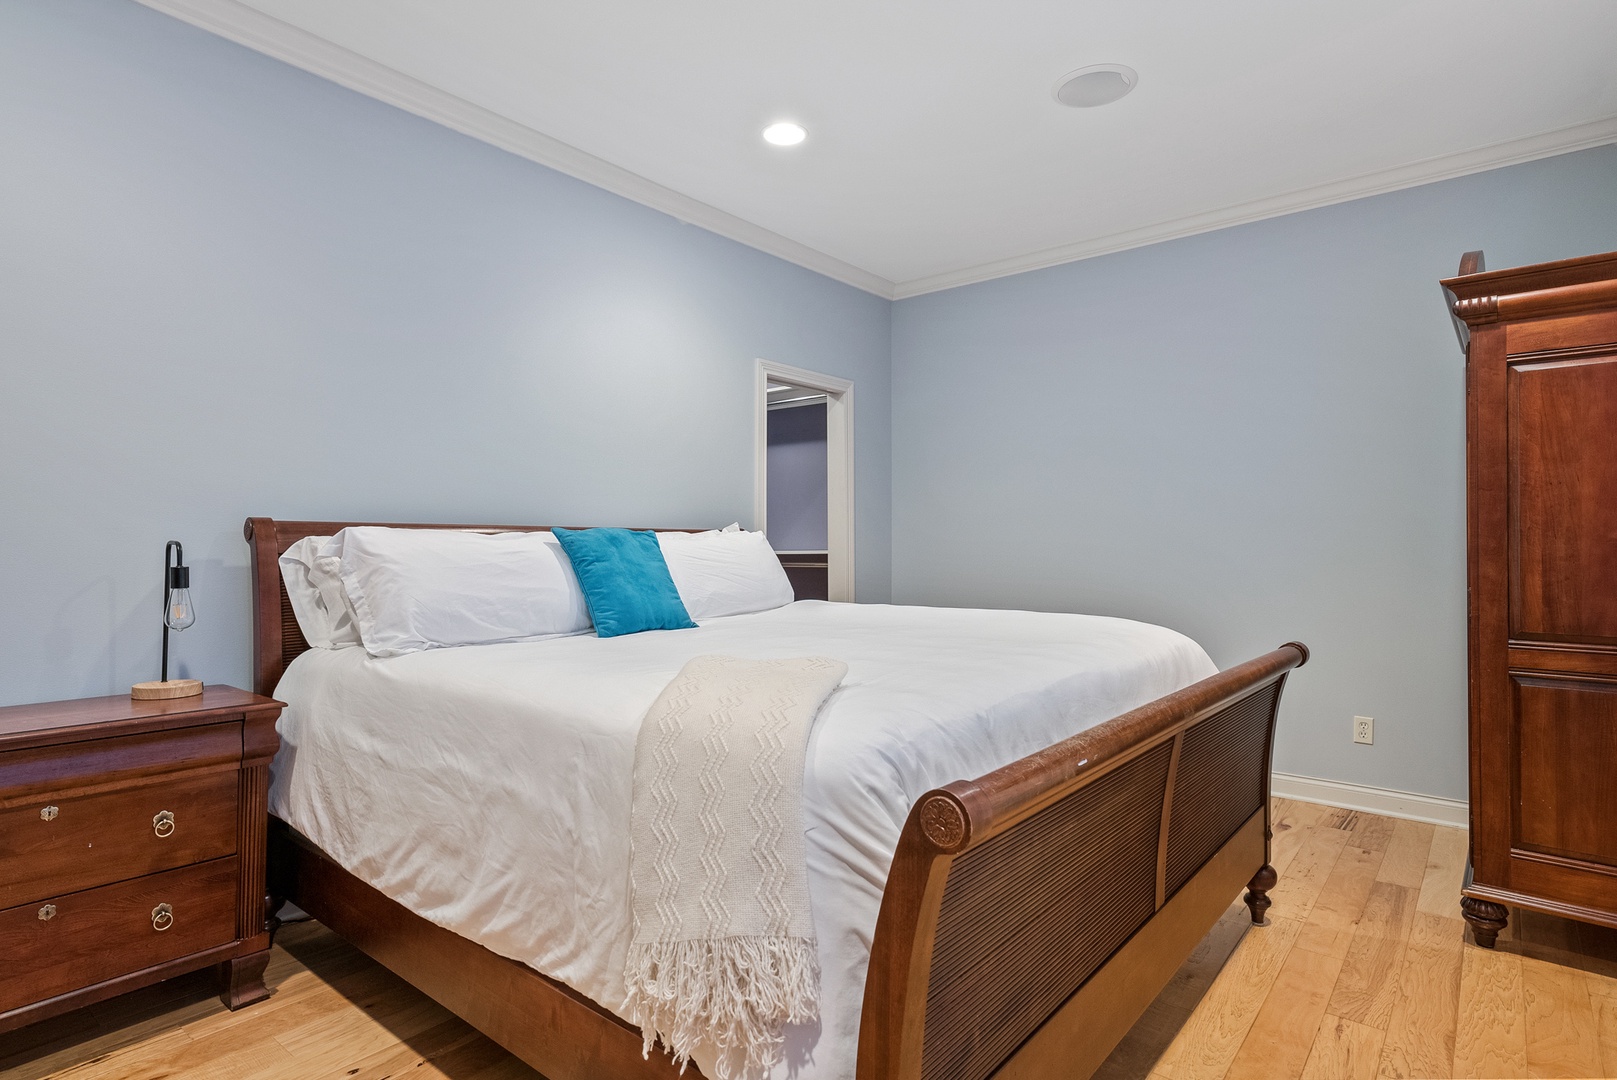 Bedroom in Downtown Cleveland Luxury Rental Home